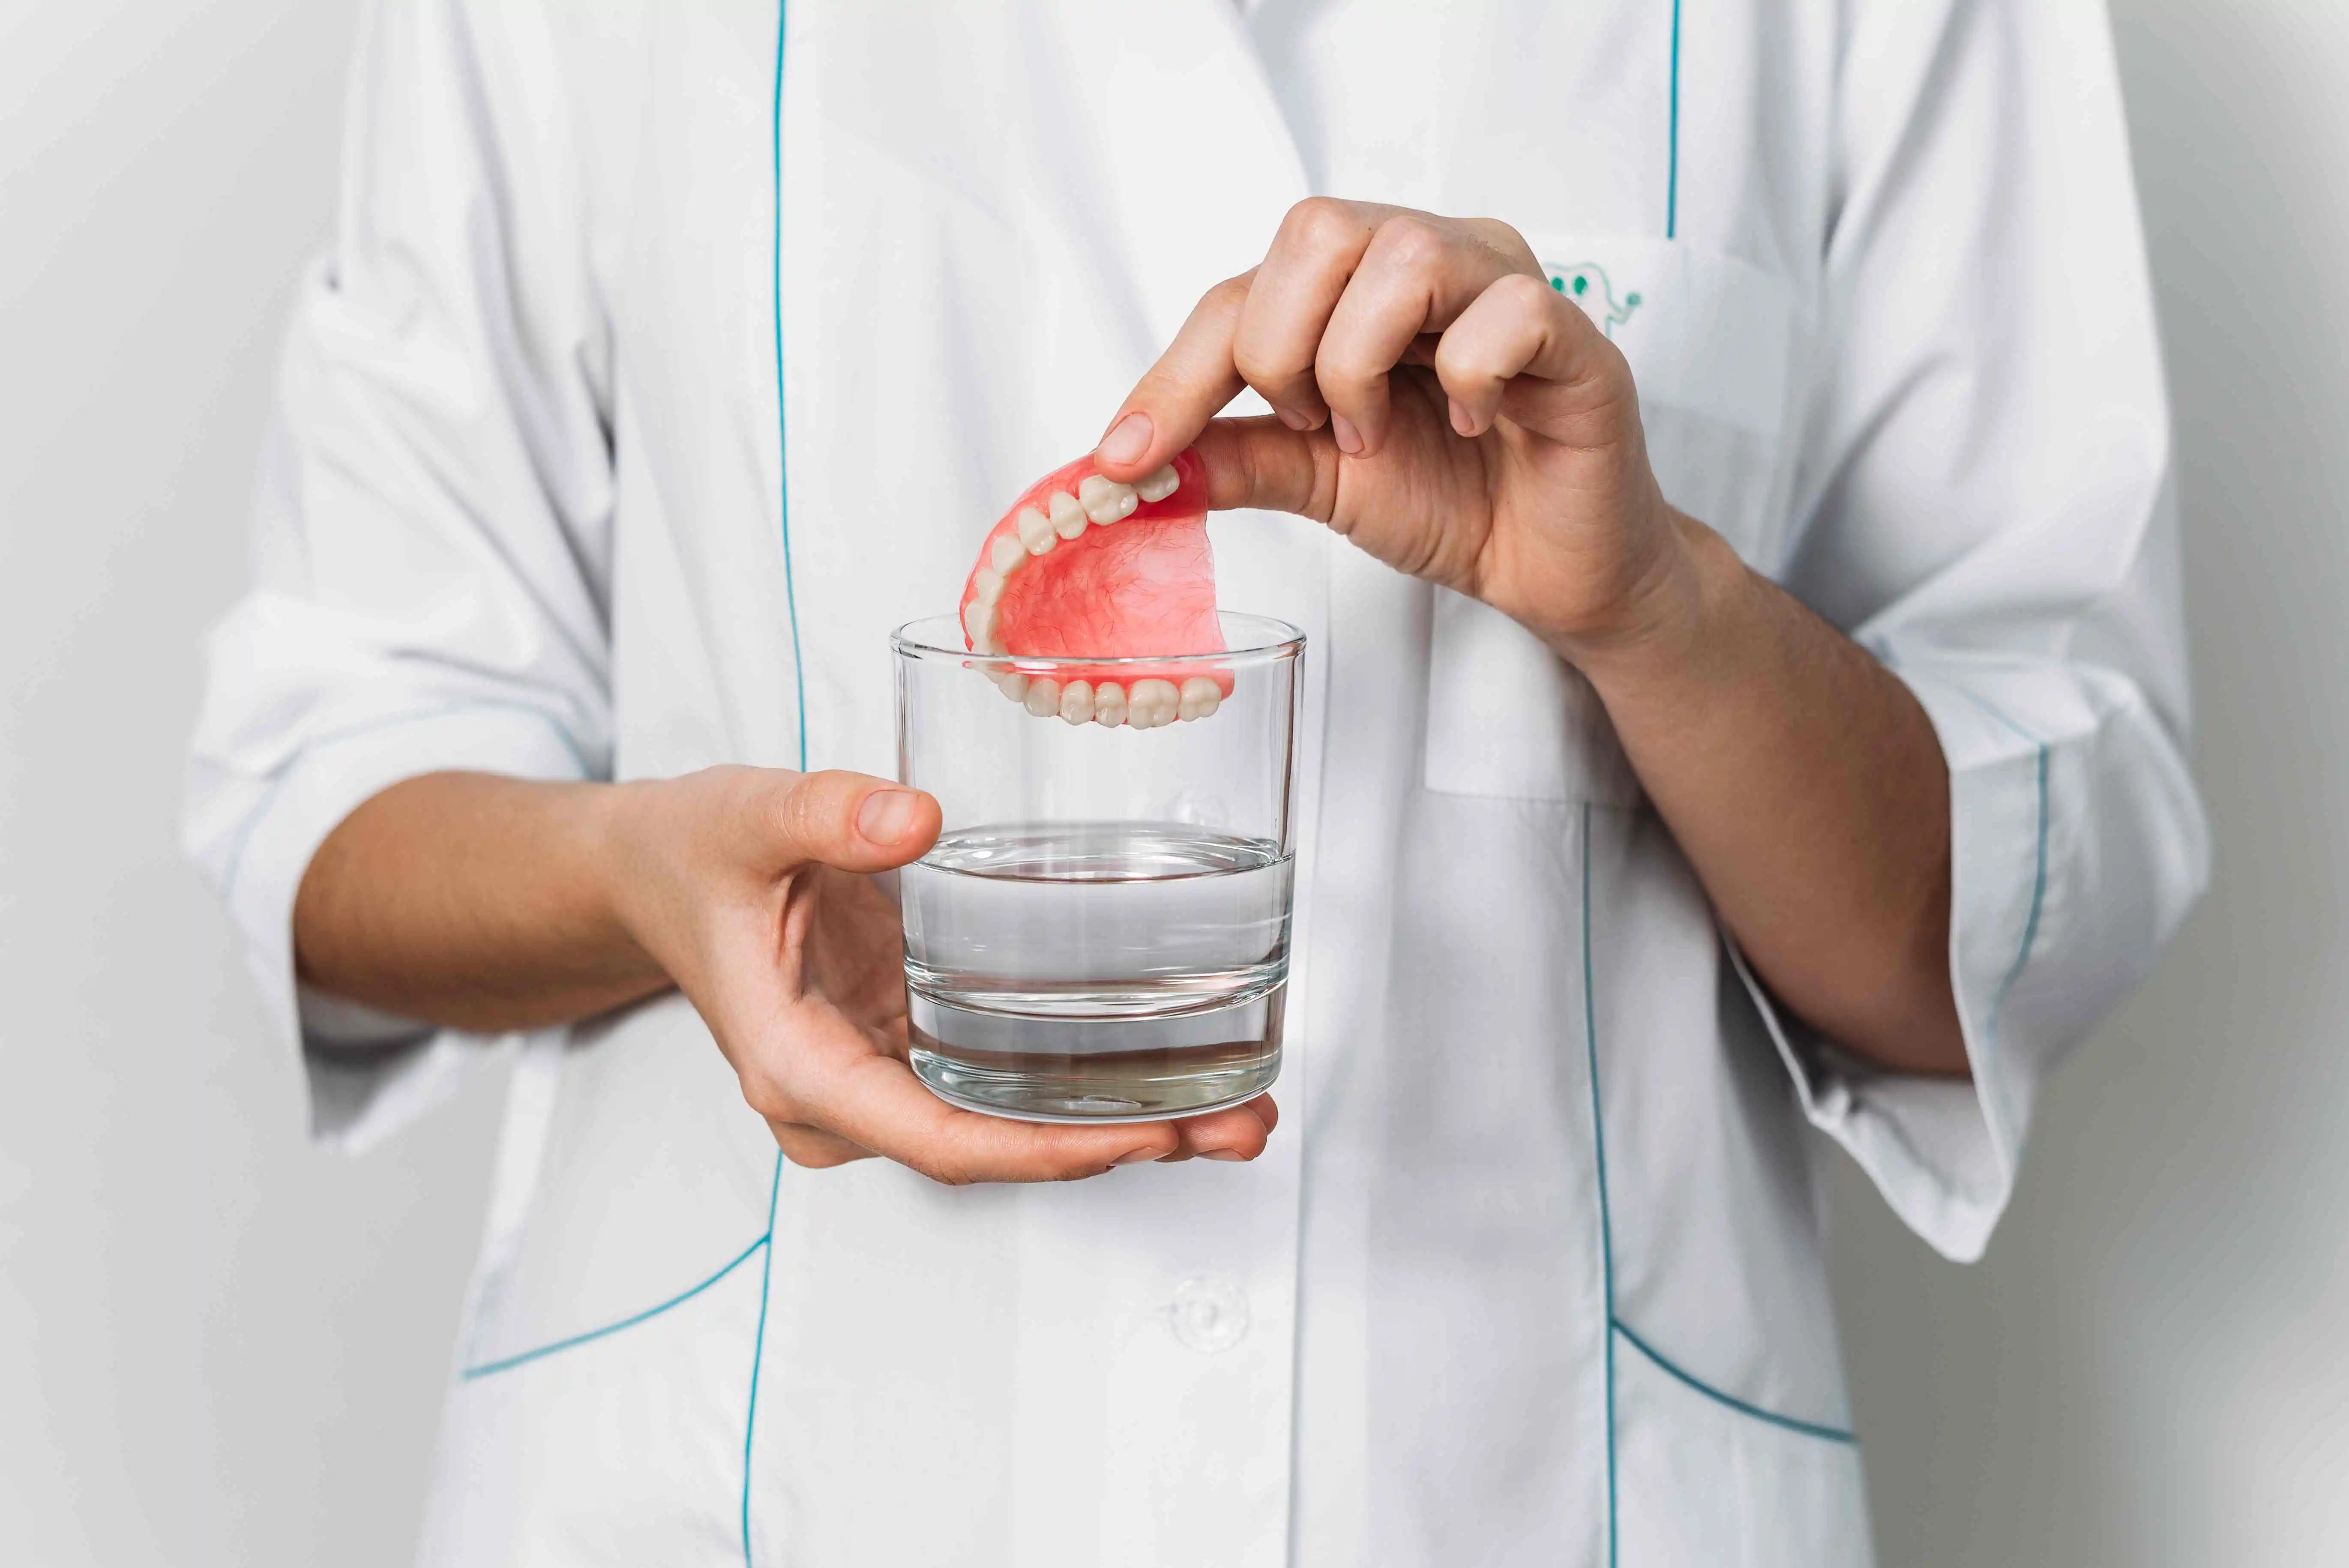 Rinse your dentures under water after eating.